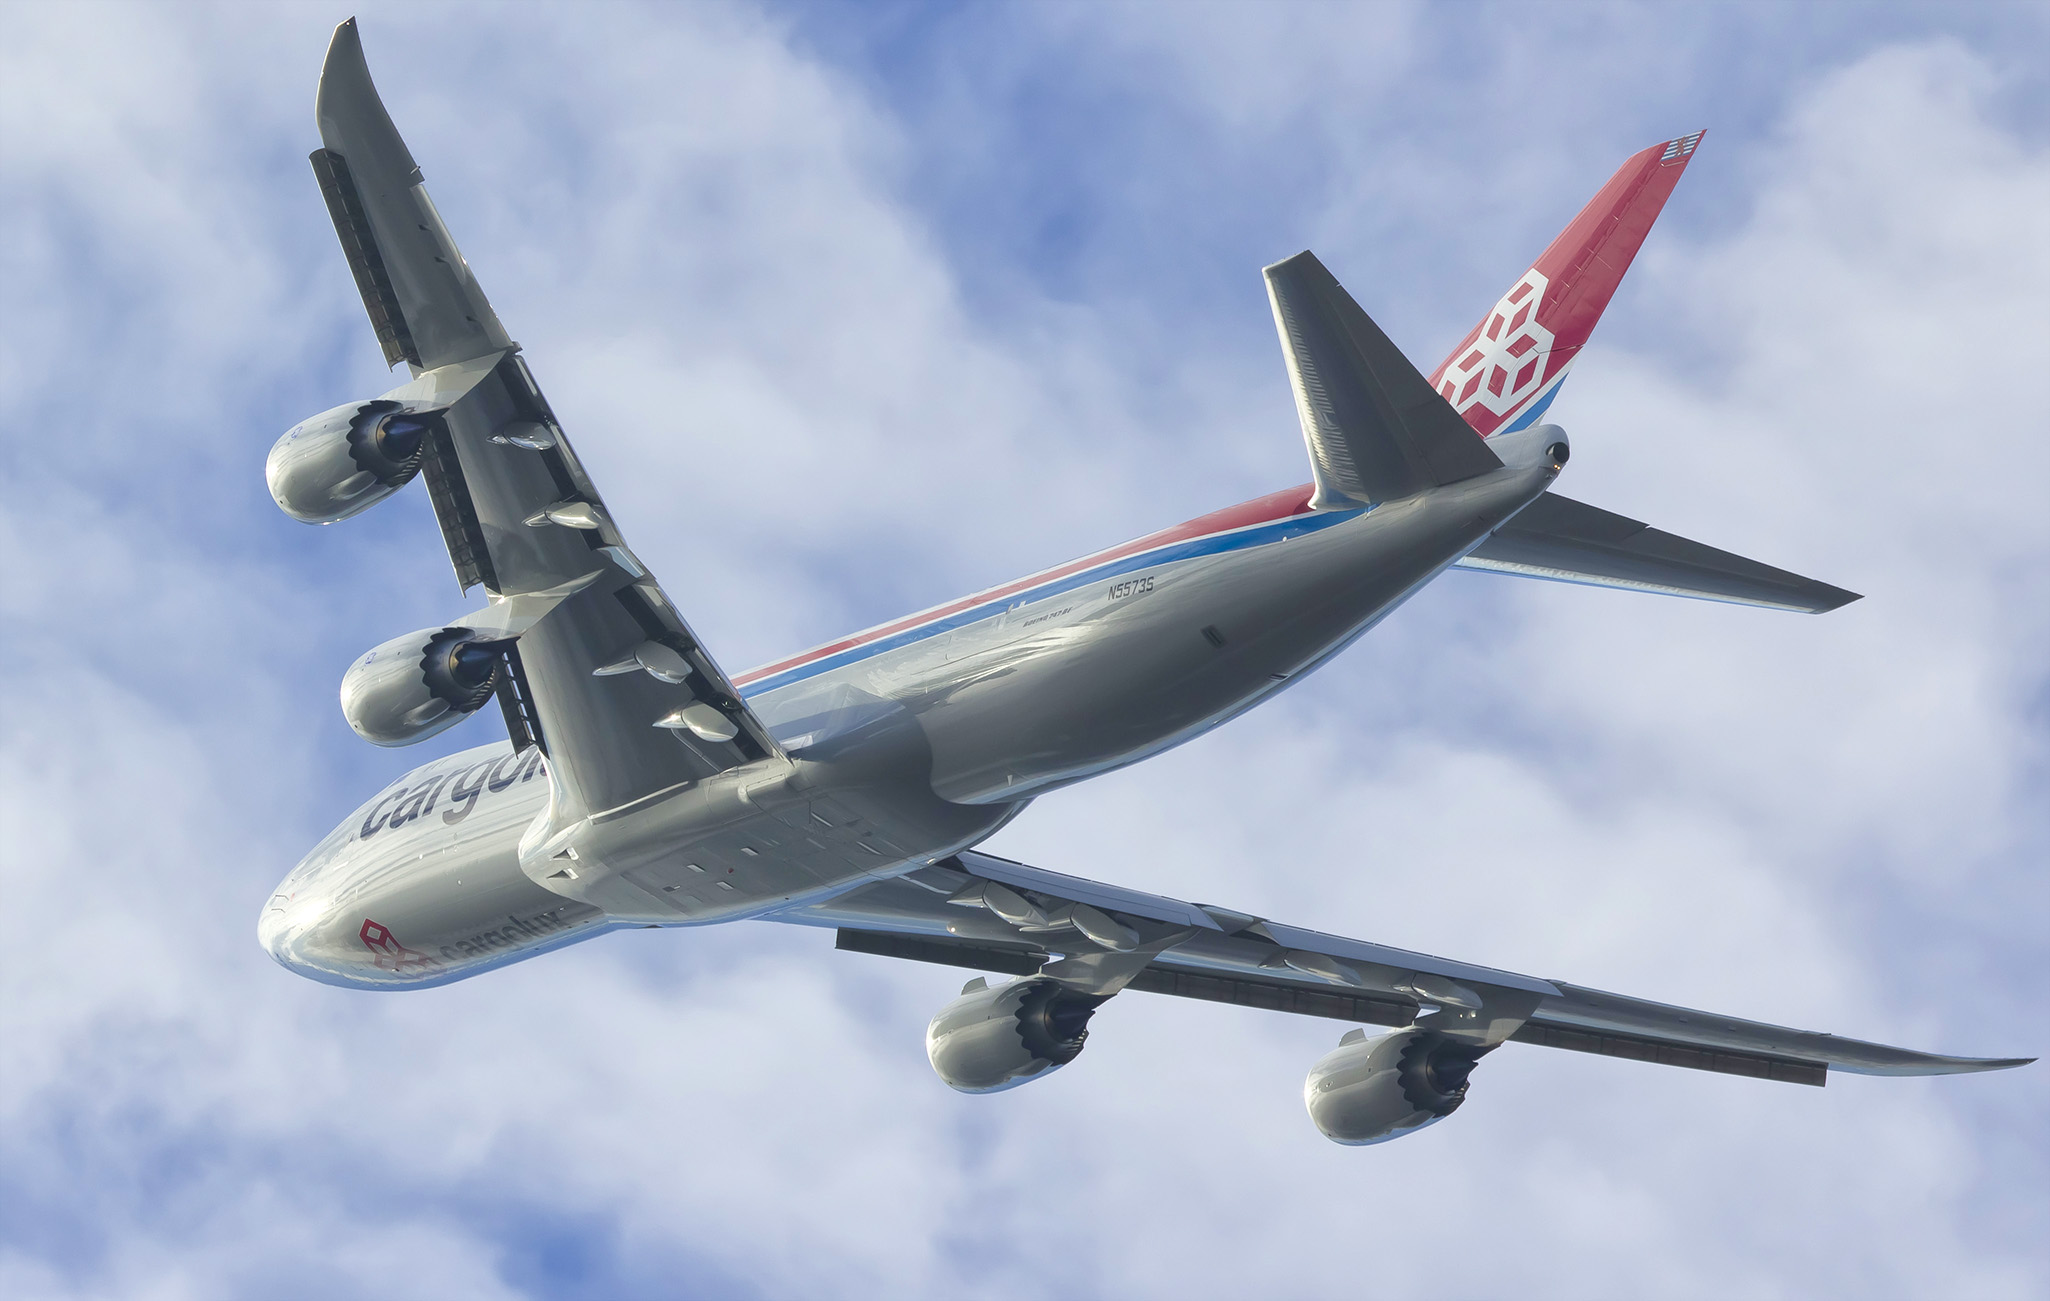 boeing-to-deliver-first-747-8f-to-cargolux-this-month-airlinereporter